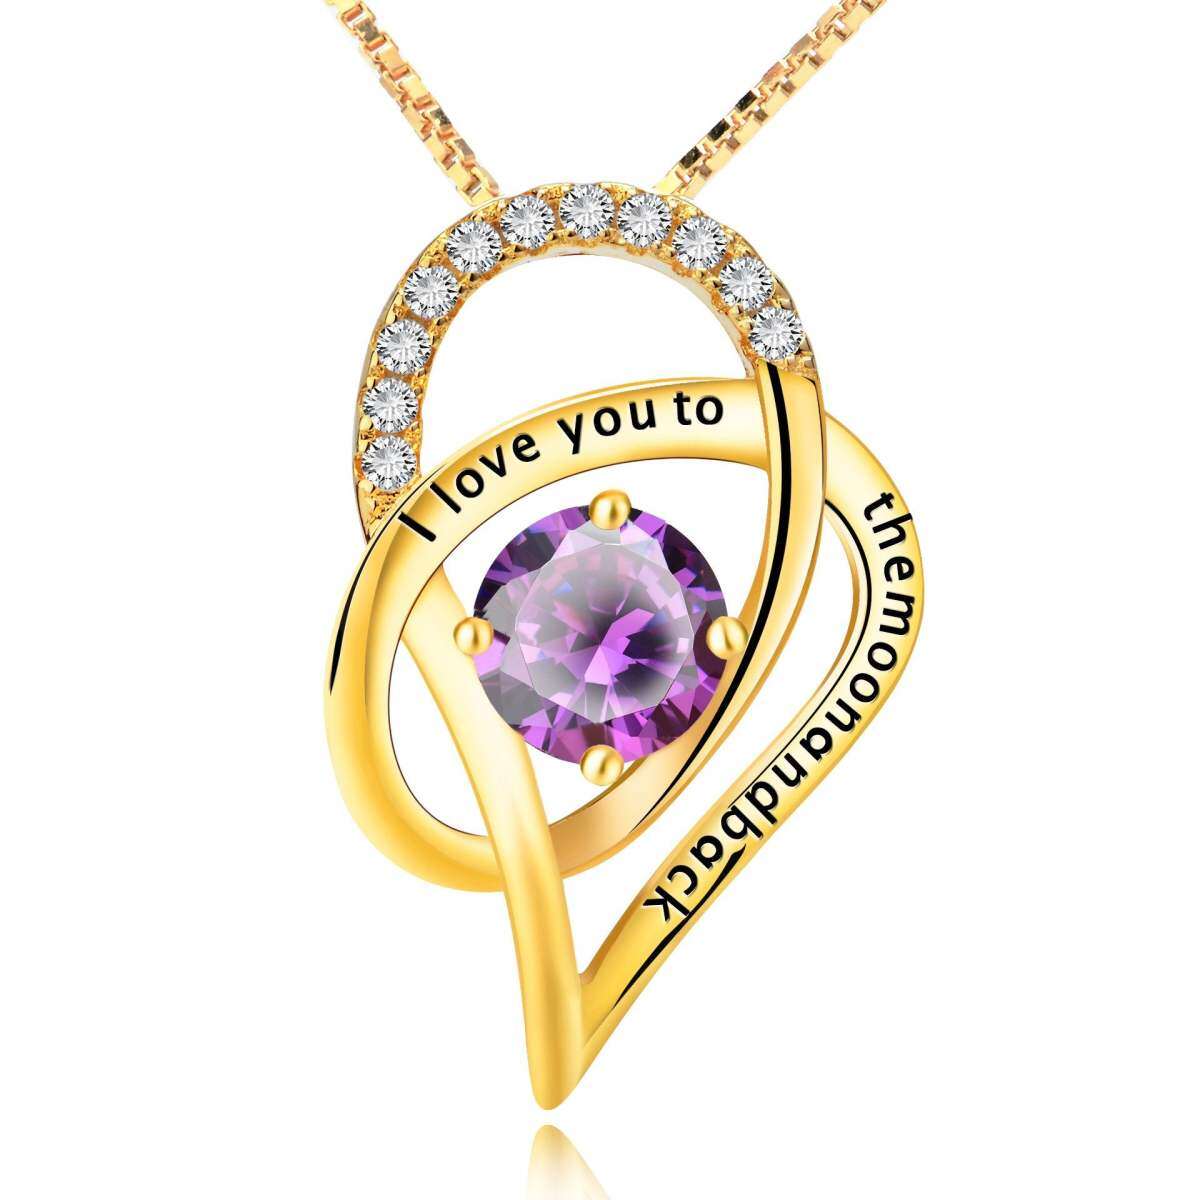 Sterling Silver with Yellow Gold Plated Circular Shaped Cubic Zirconia Moon Pendant Necklace with Engraved Word-1